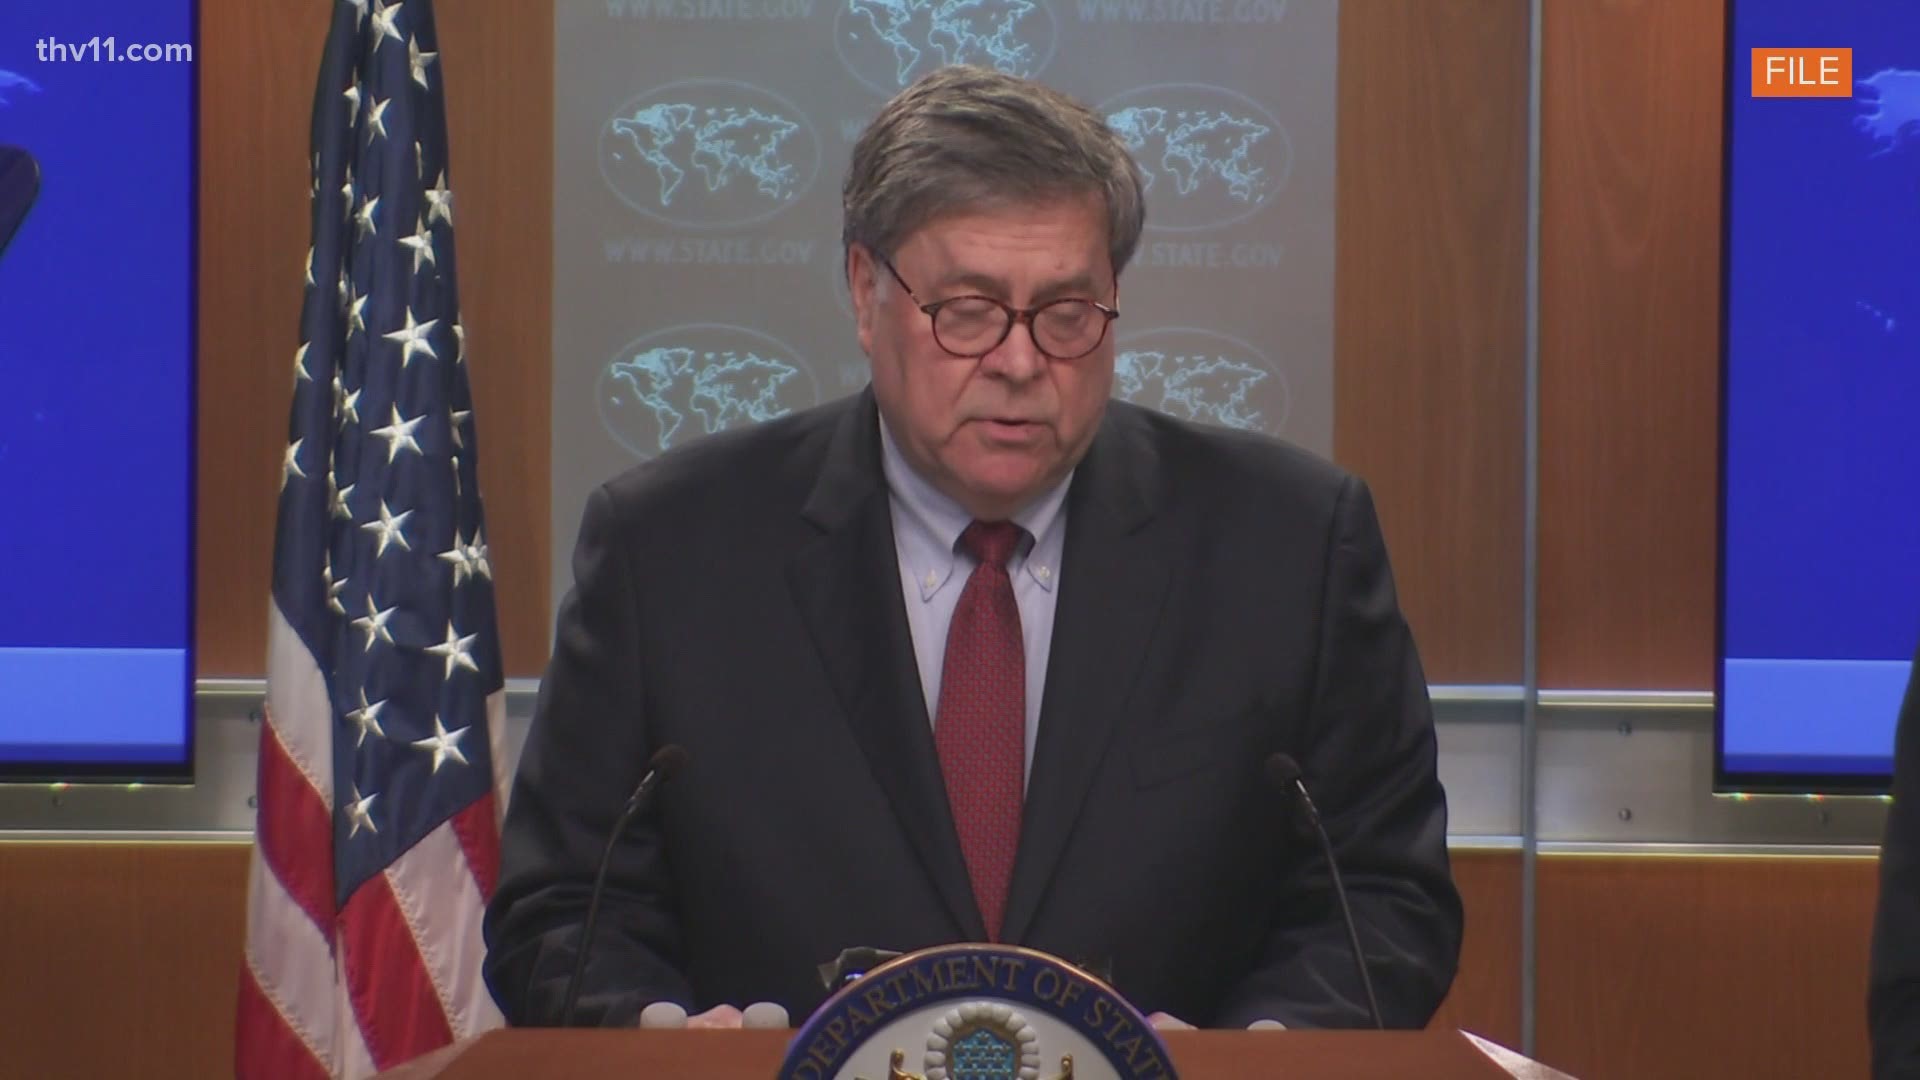 U.S. Attorney General William Barr will be in Central Arkansas today.